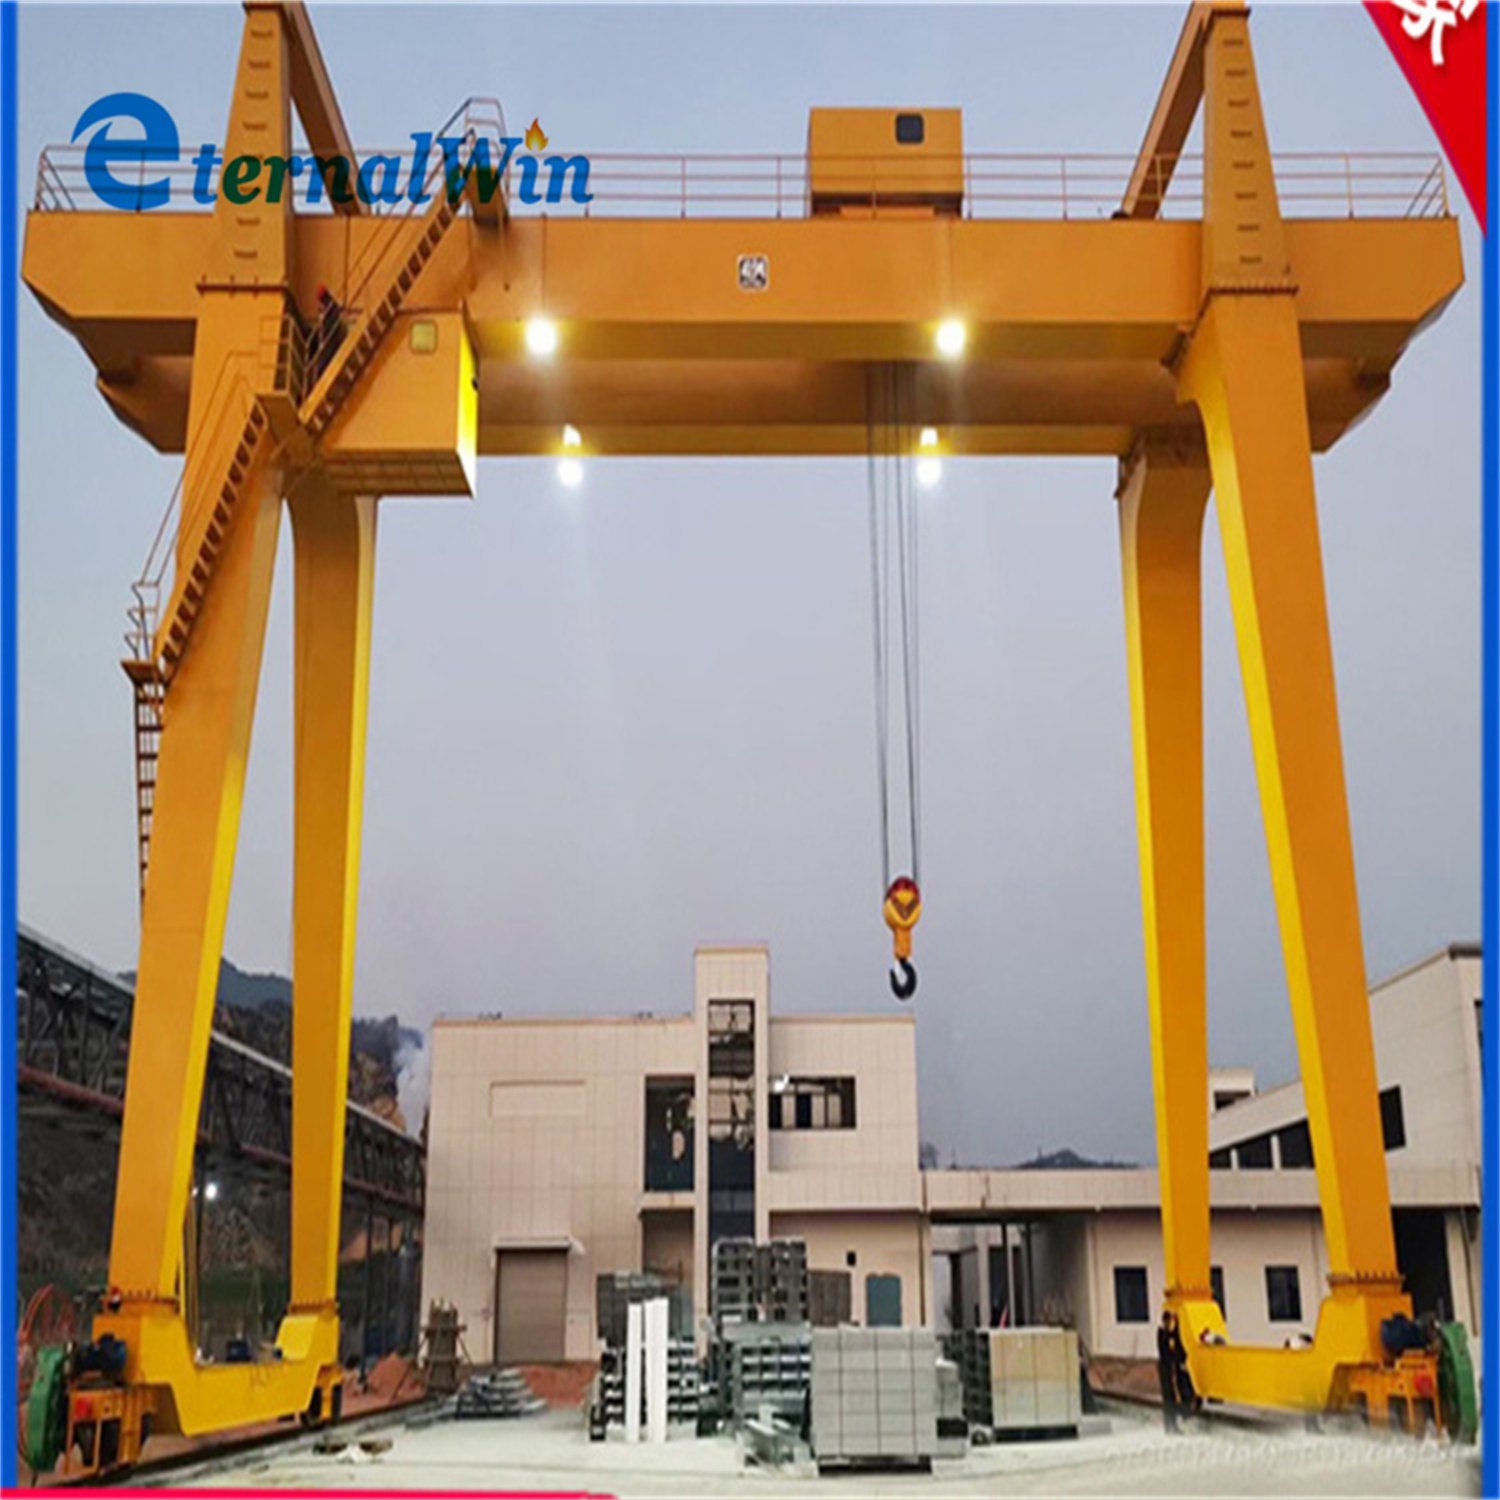 Rail Type Double Girder Outdoor Double Girder Giant Goliath Heavvy Duty Gantry Crane 30ton with Overhanging Boom Cantilever